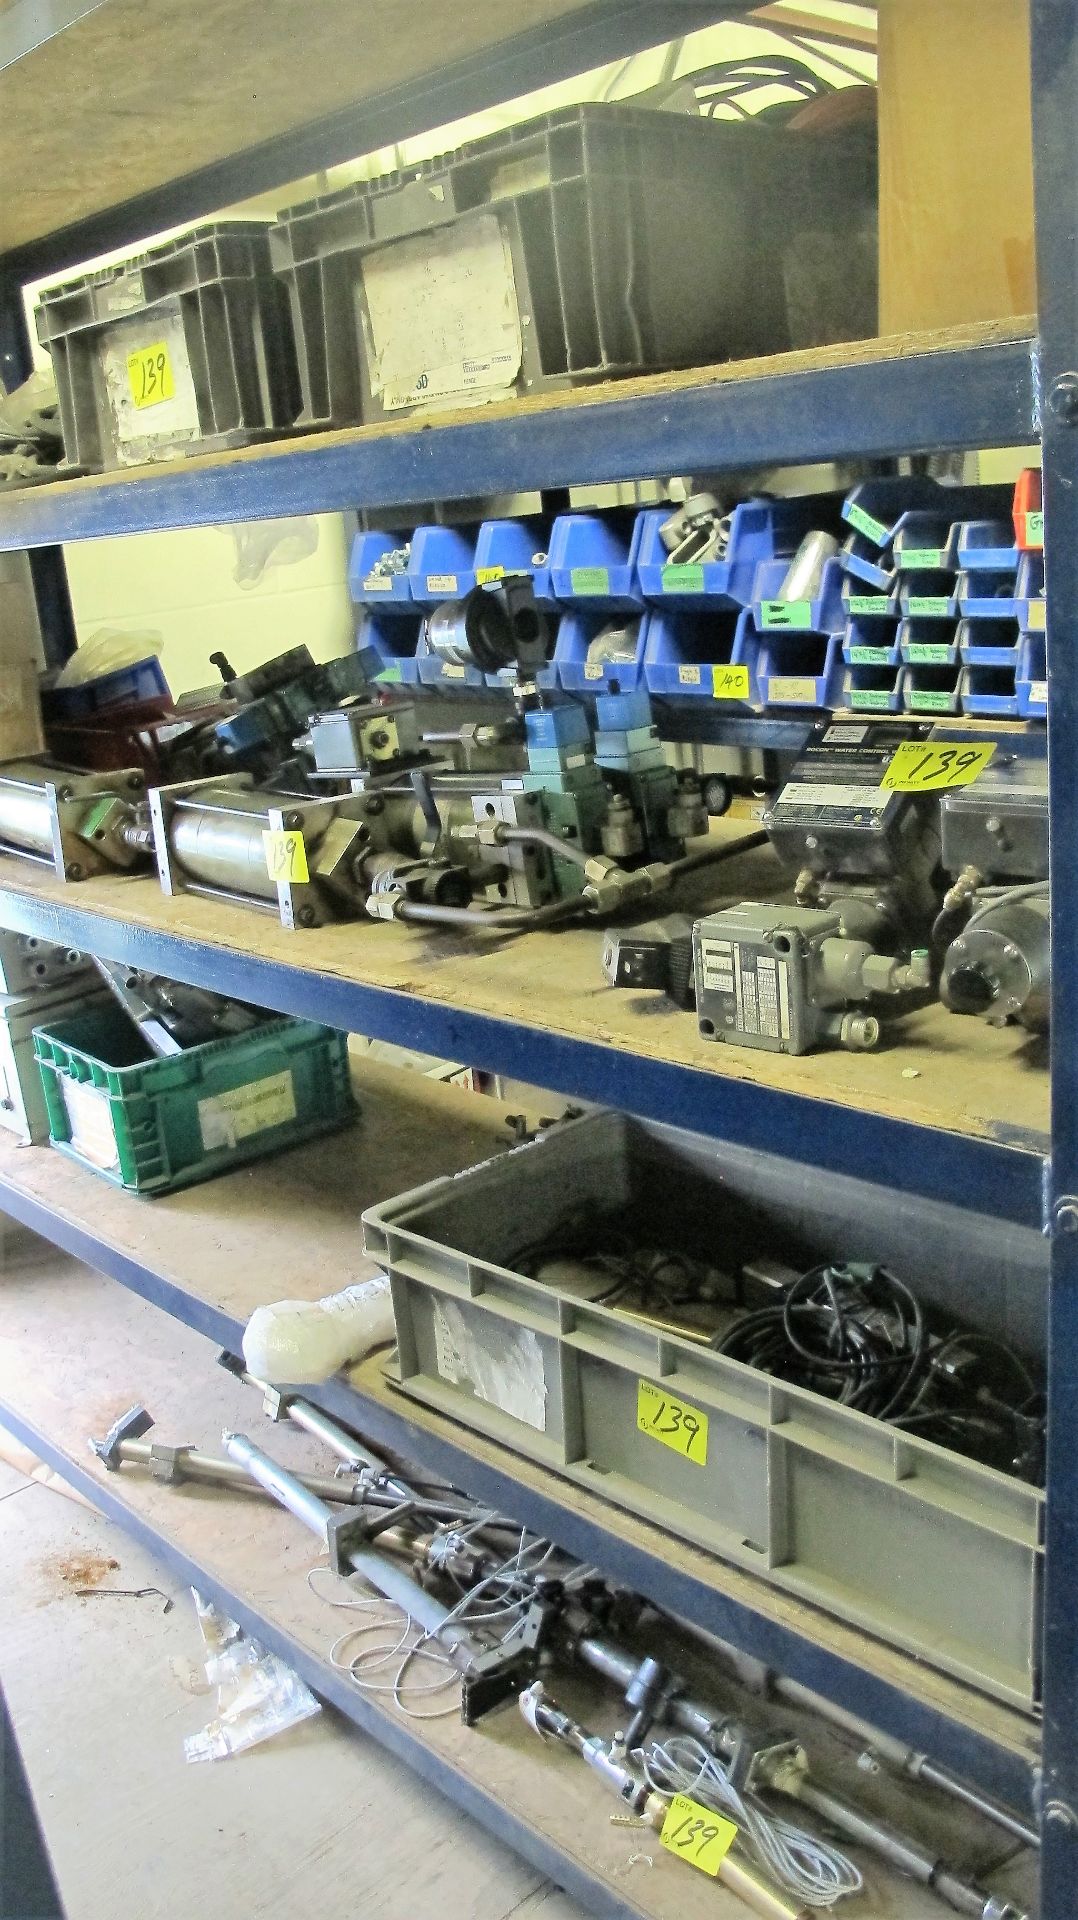 CONTENTS OF (1) METAL RACK INCLUDING WATER CONTROL VALVES, CYLINDERS, SPOT WELDER PARTS, CABLES,